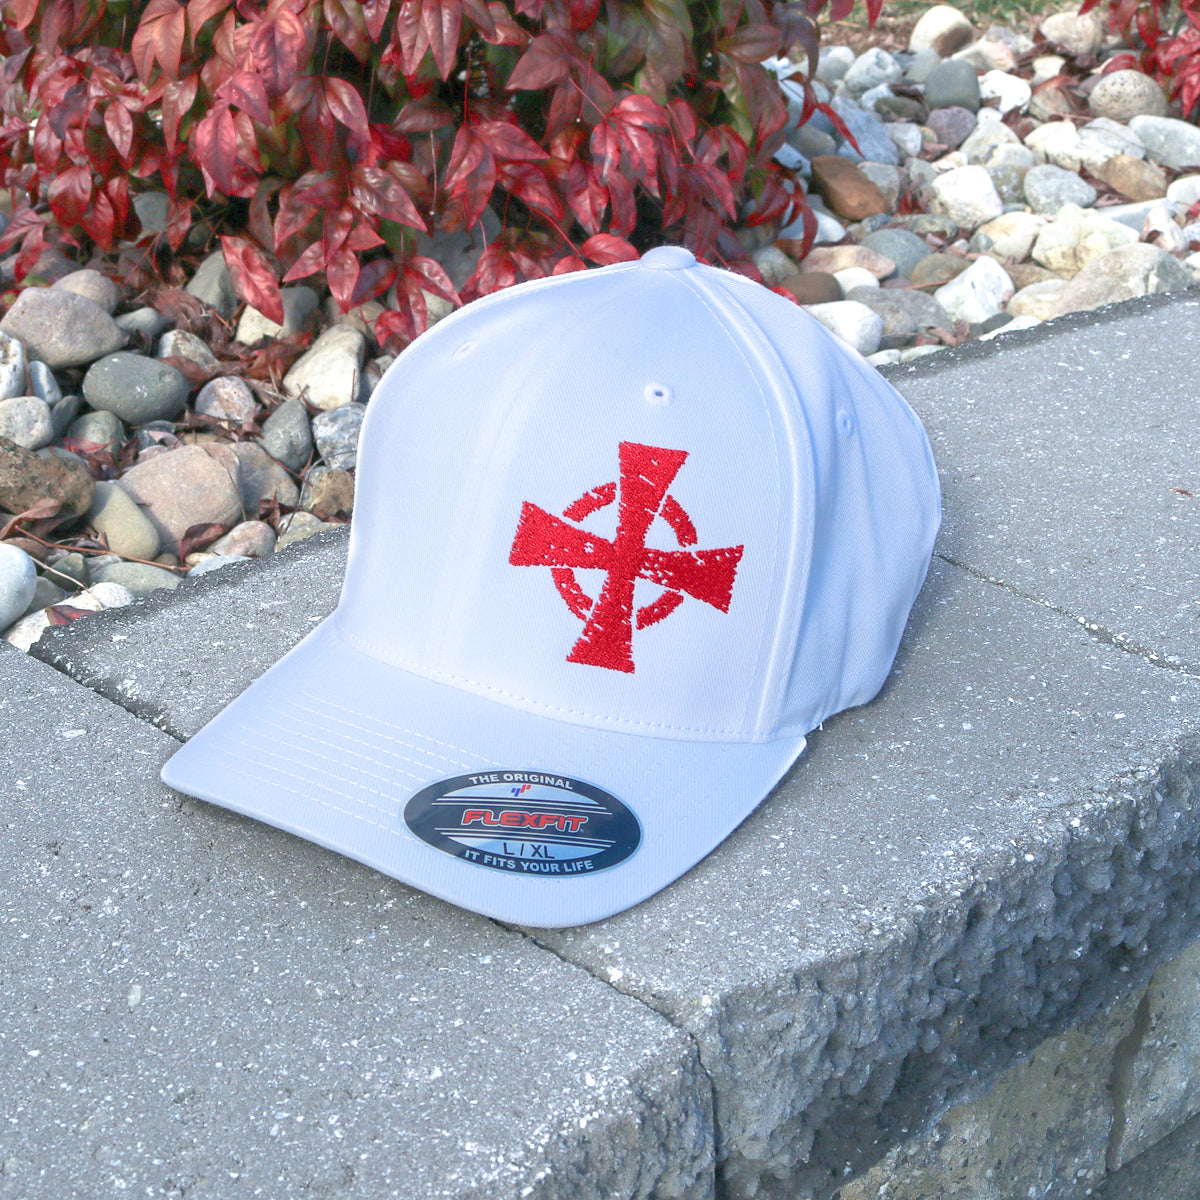 A Crusader Flexfit hat features the Warrior 12 crusader cross embroidered on white a Flexfit hat.